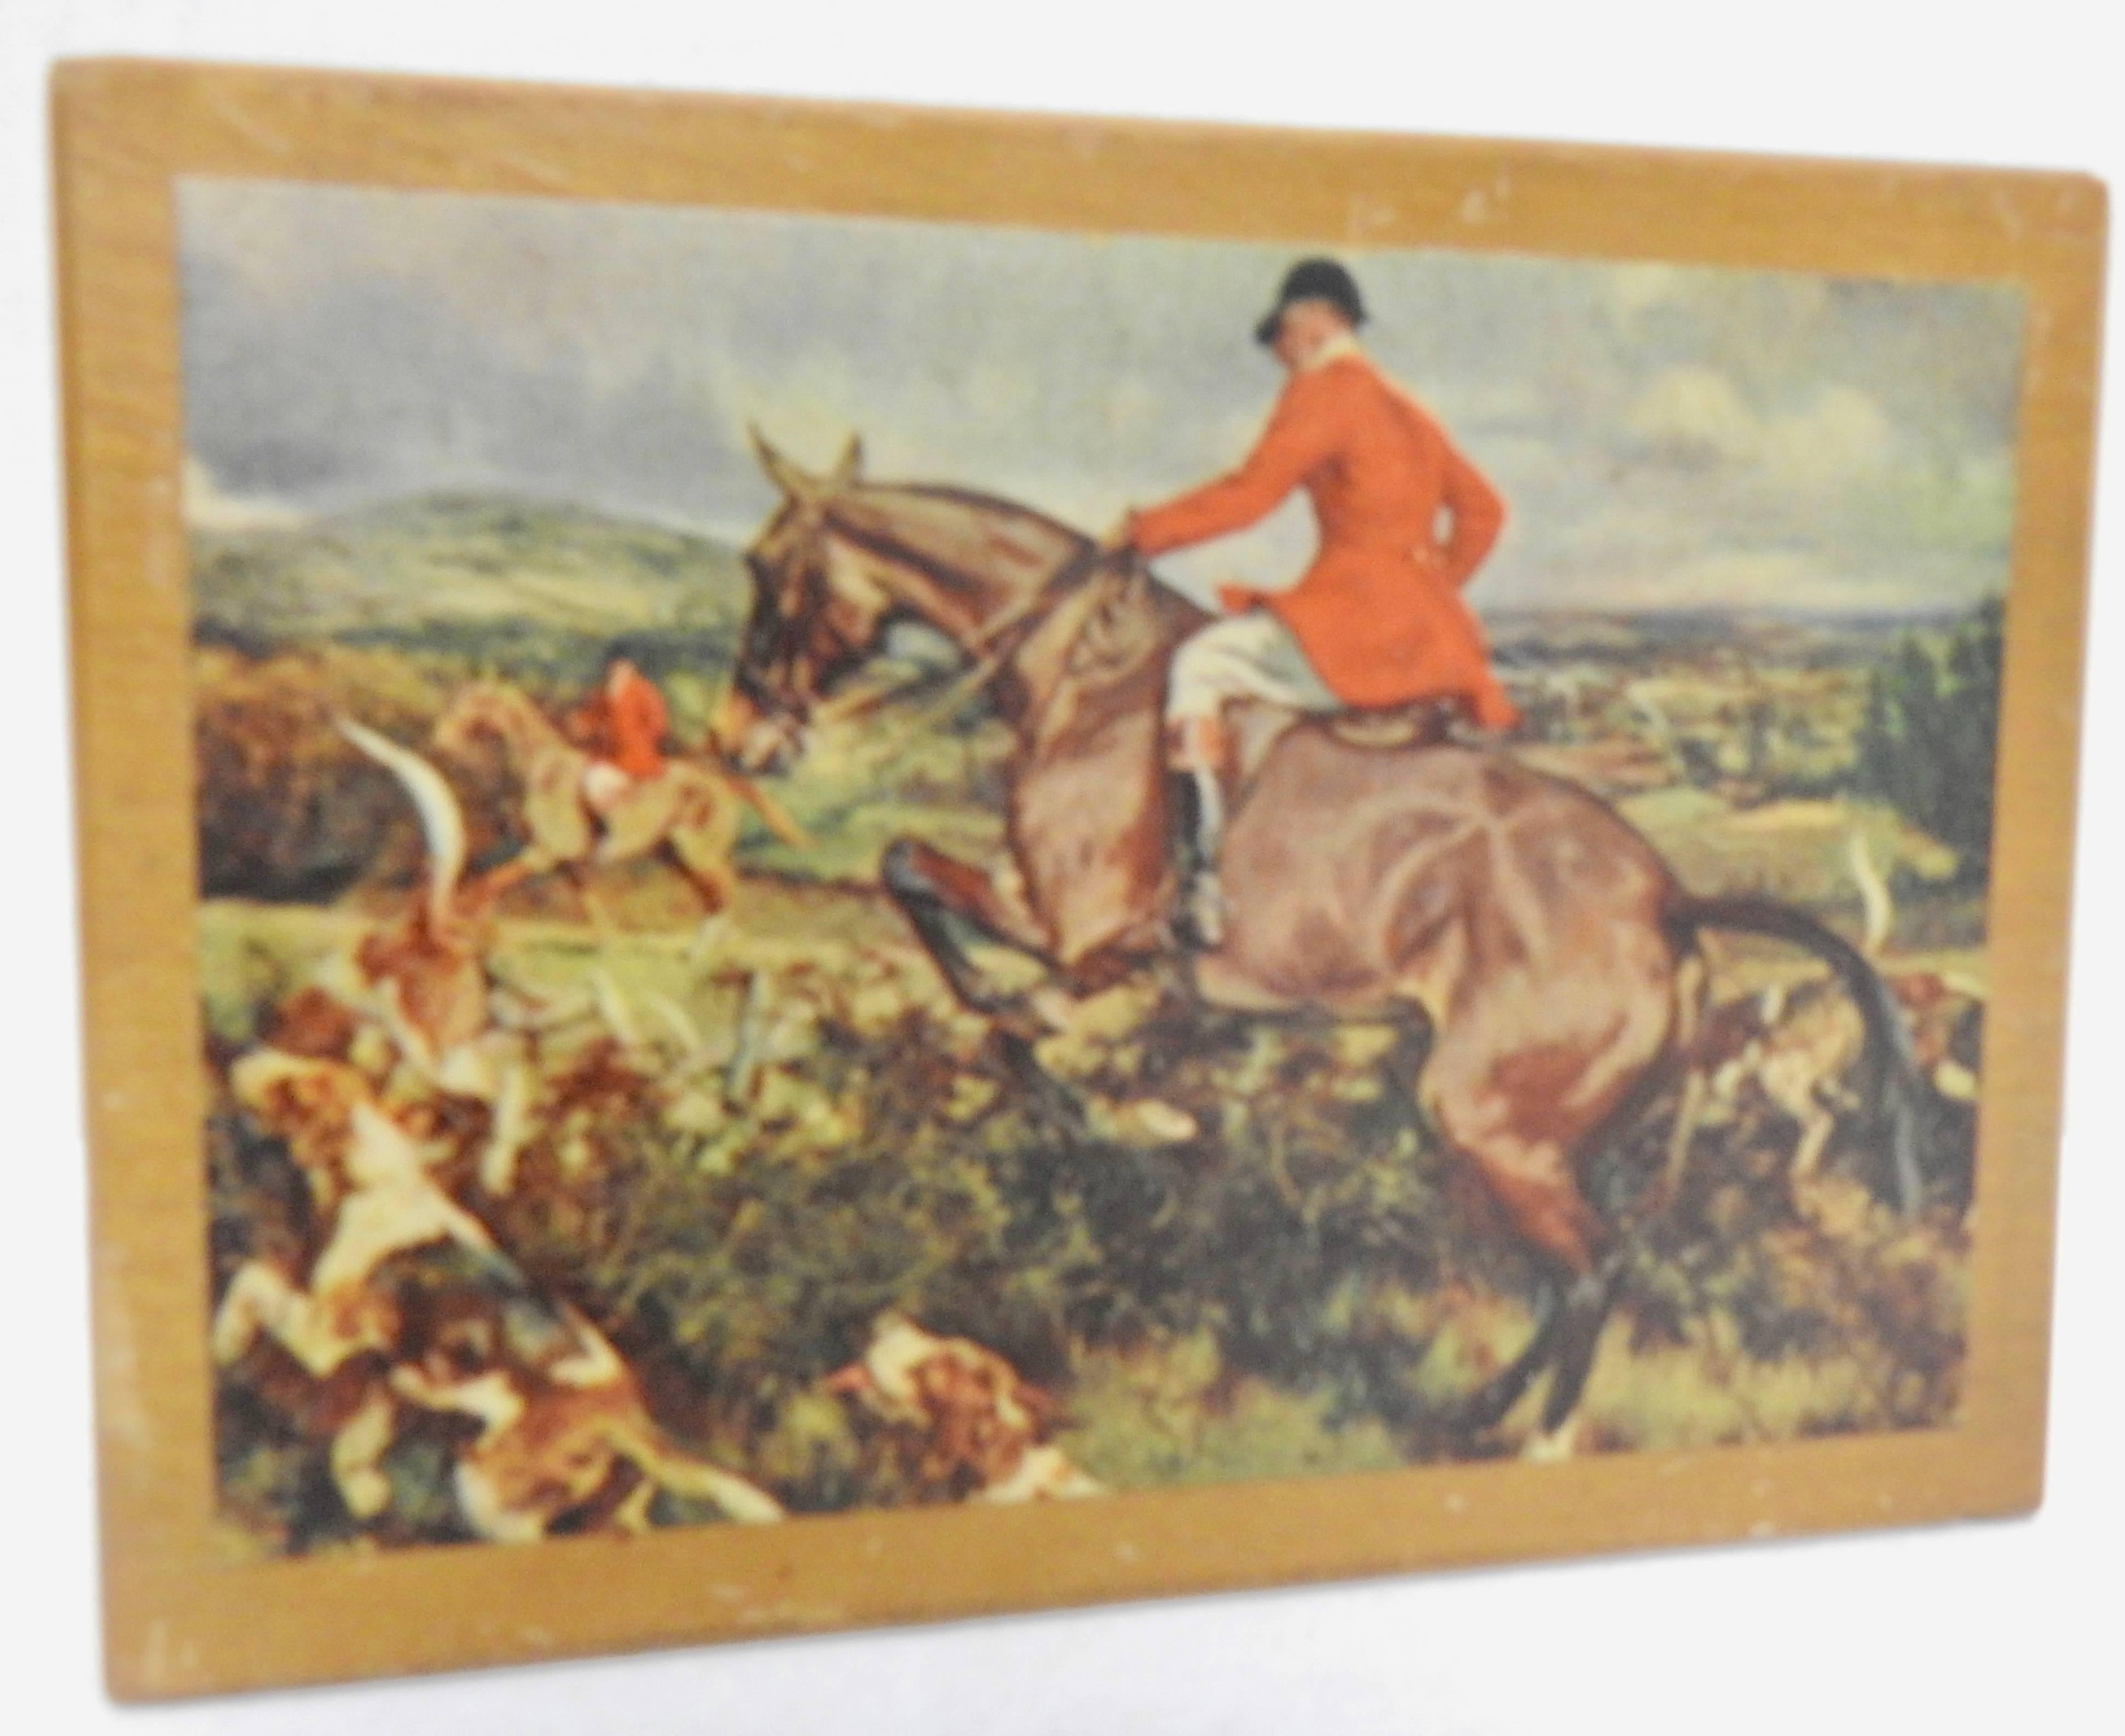 The hunt is on this vintage wooden box from the midcentury era. The lid has been decoupaged with a print of the scene. The box is otherwise unfinished.